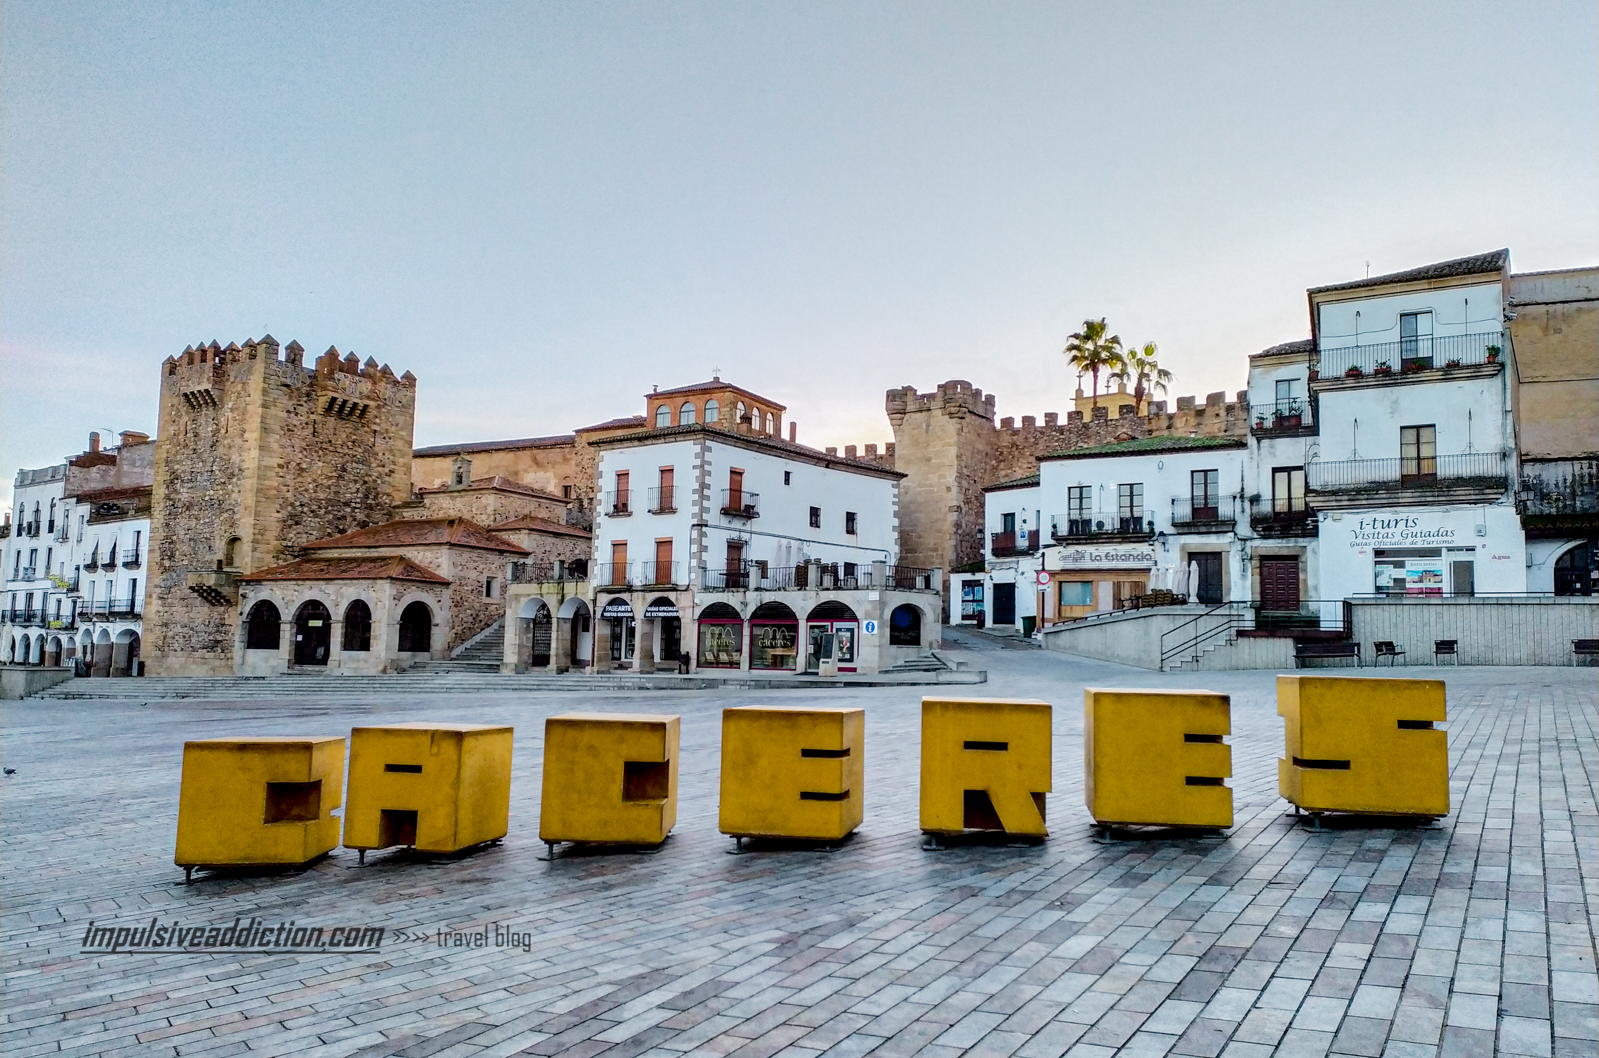 caceres